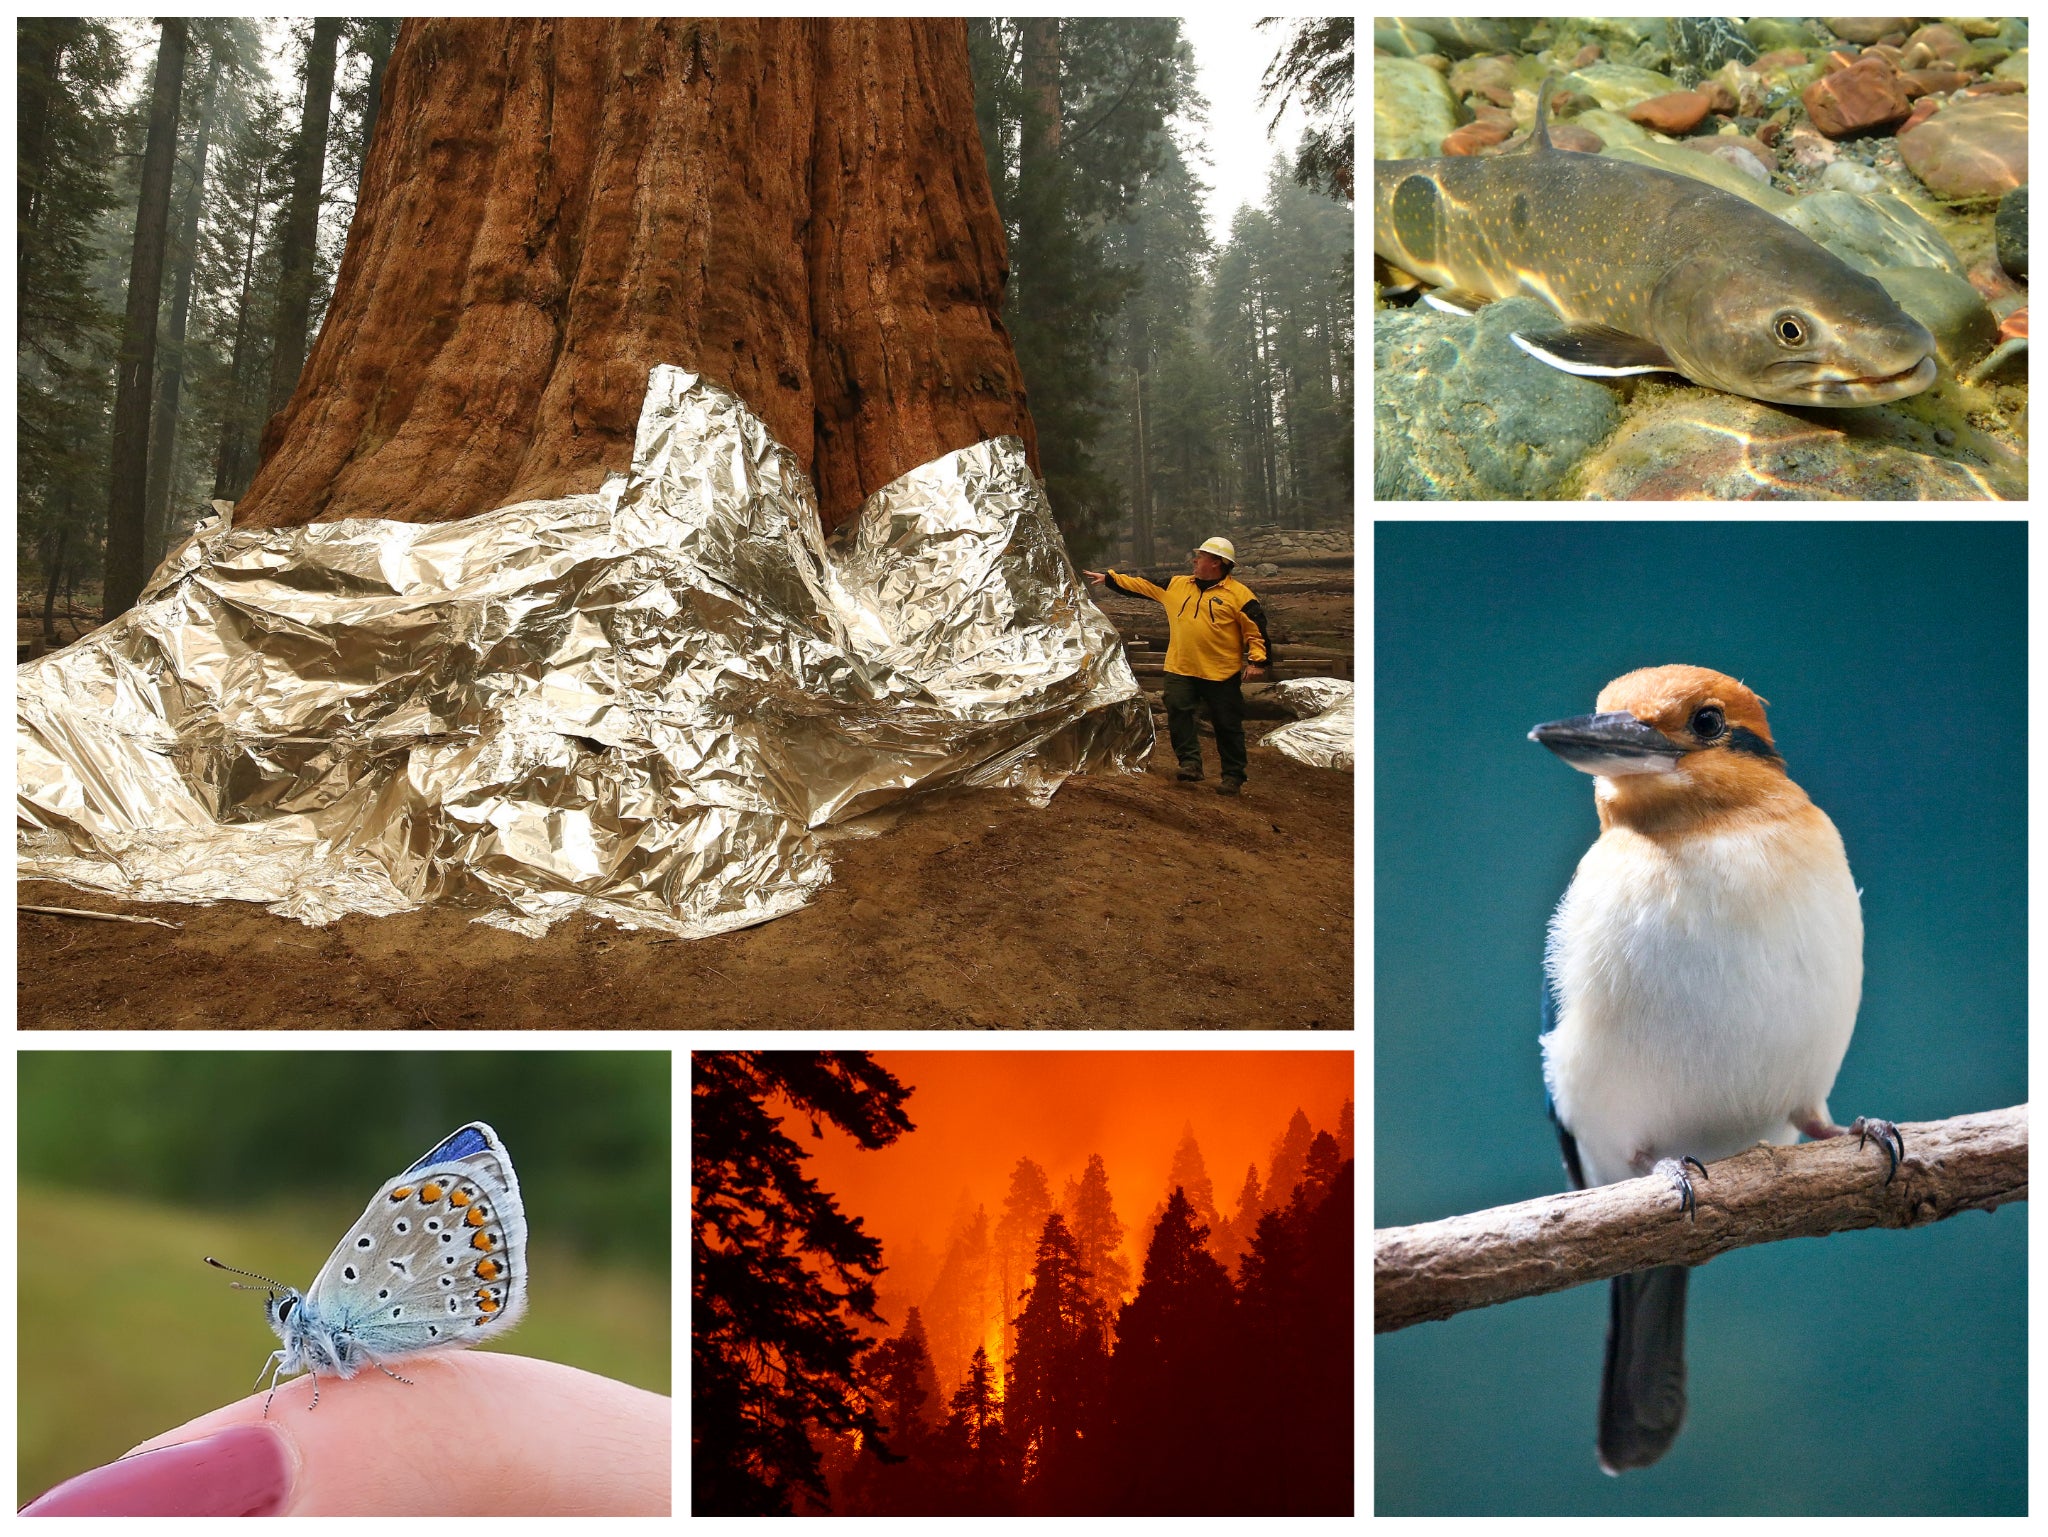 From top left, clockwise: The General Sherman sequoia wrapped in foil to protect against wildfire, a bull trout in Montana, a Guam kingfisher, the 2020 SQF forest fire complex in California and the endangered Karner blue butterfly.